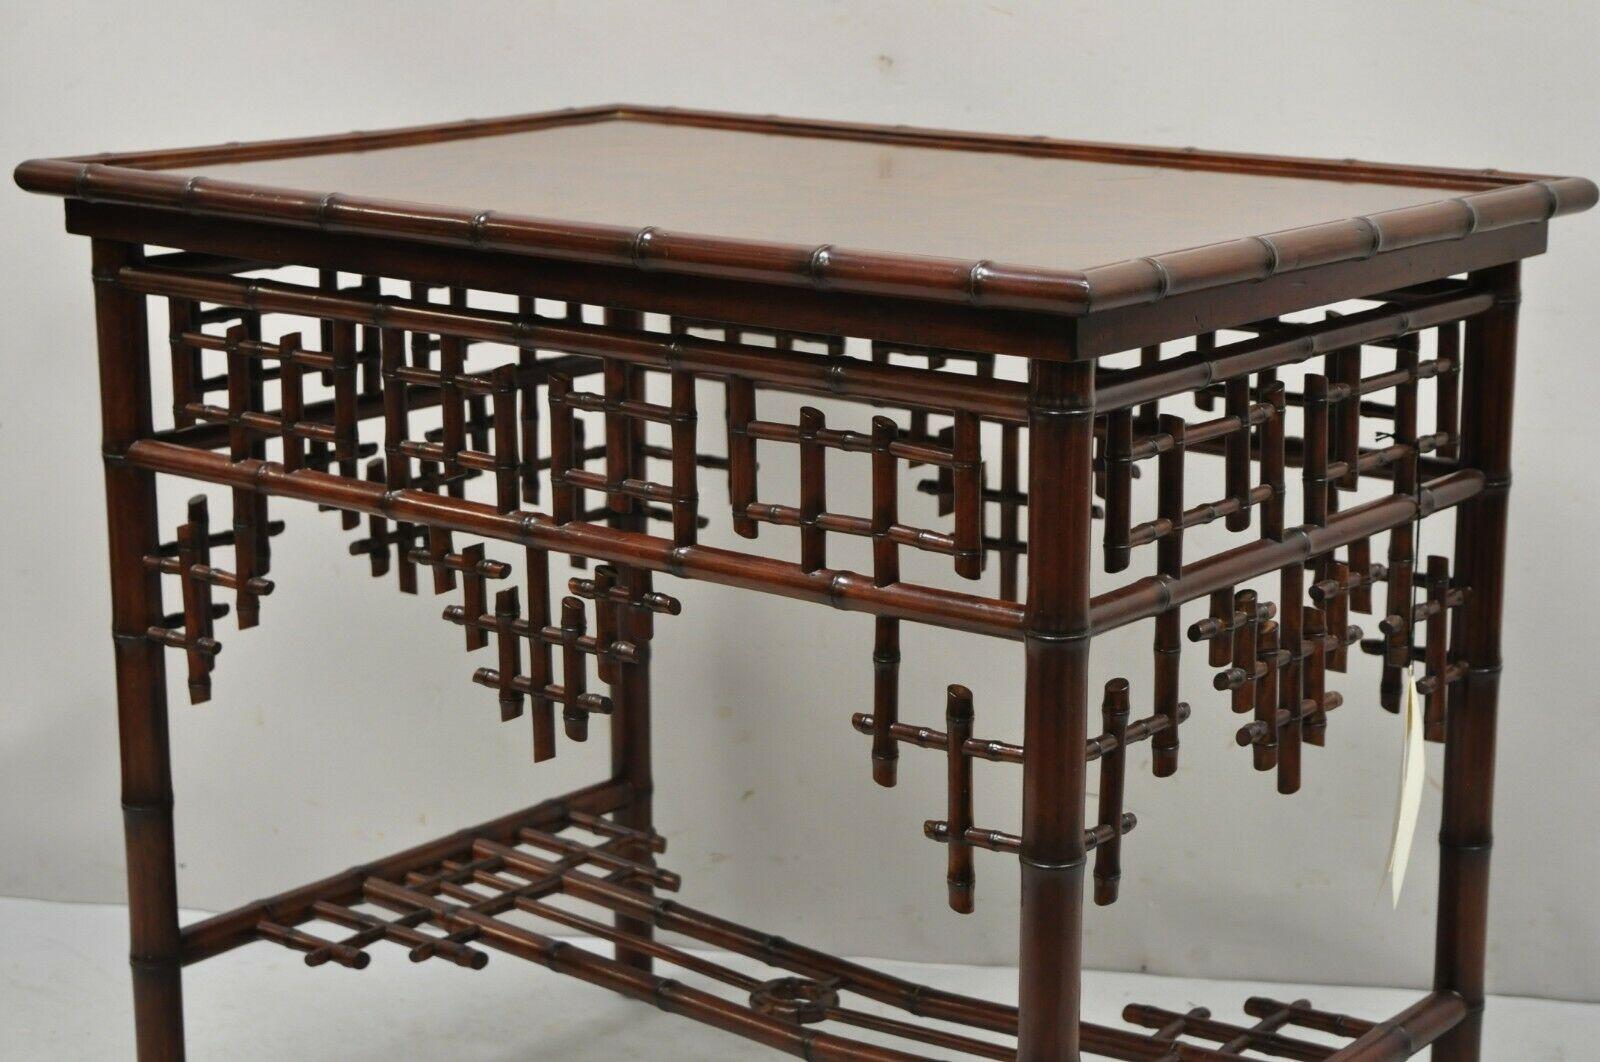 Chinese Chippendale Ralph Lauren Home Indian Cove Lodge Fretwork Faux Bamboo Chinoiserie Side Table